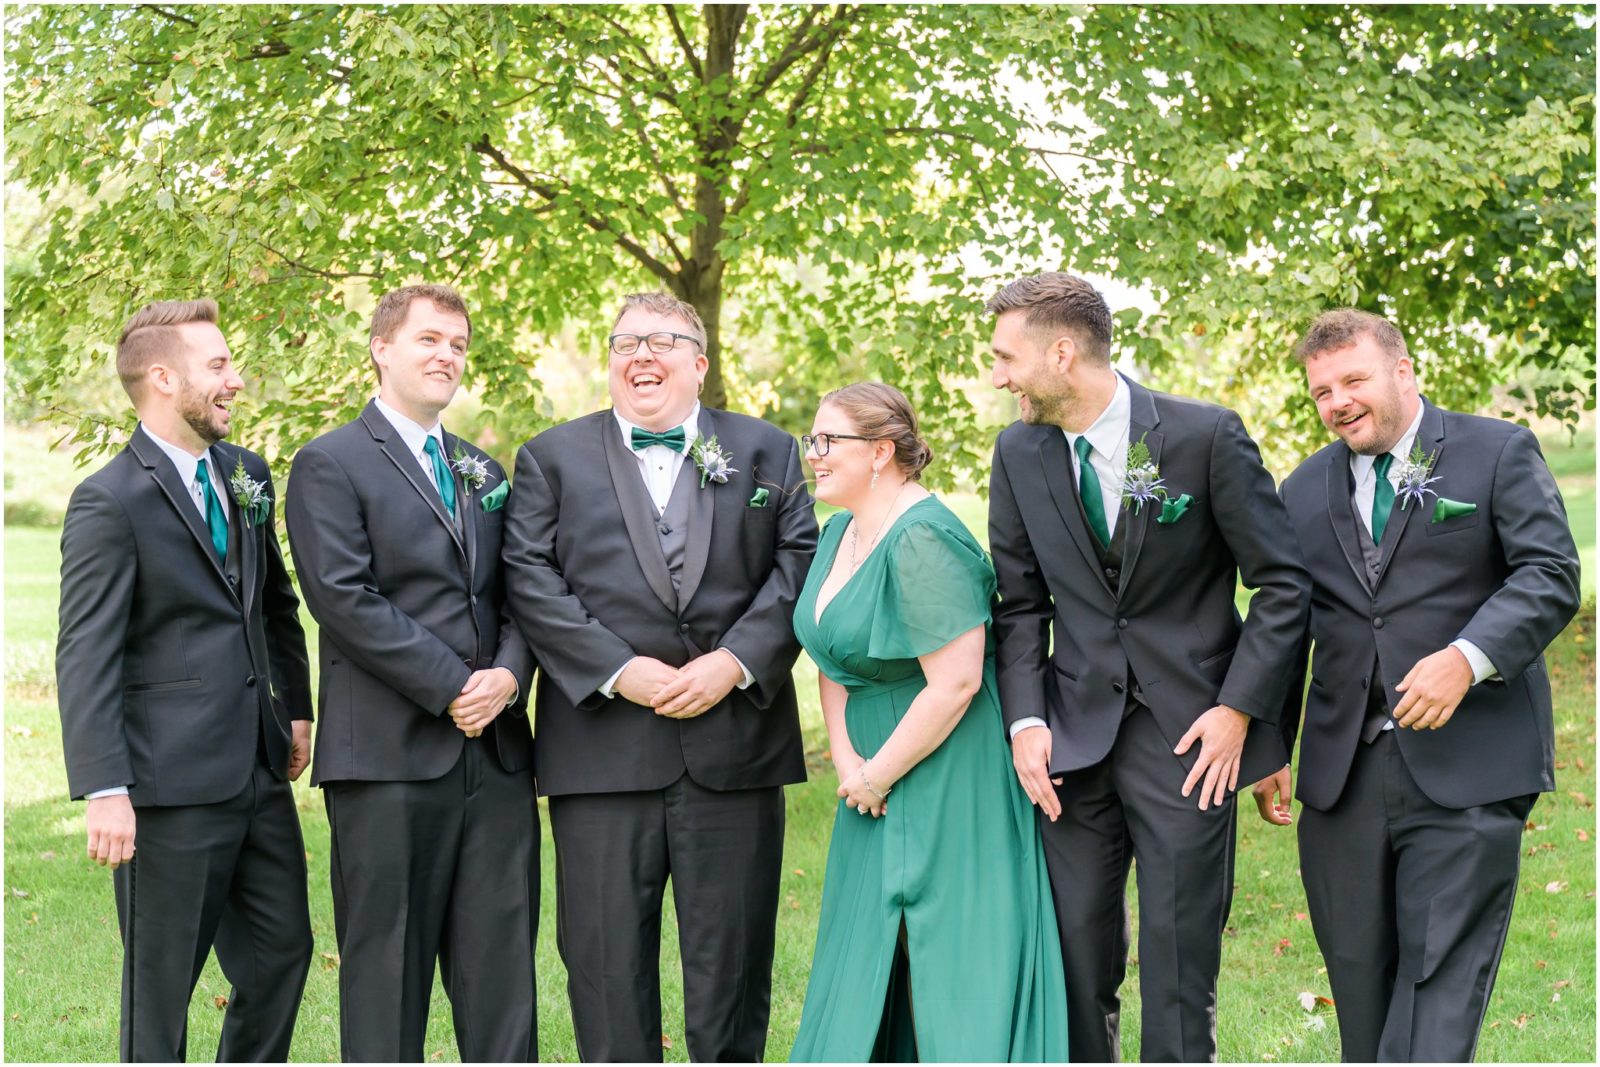 Groom and groomsmen laughing together Balmoral House wedding